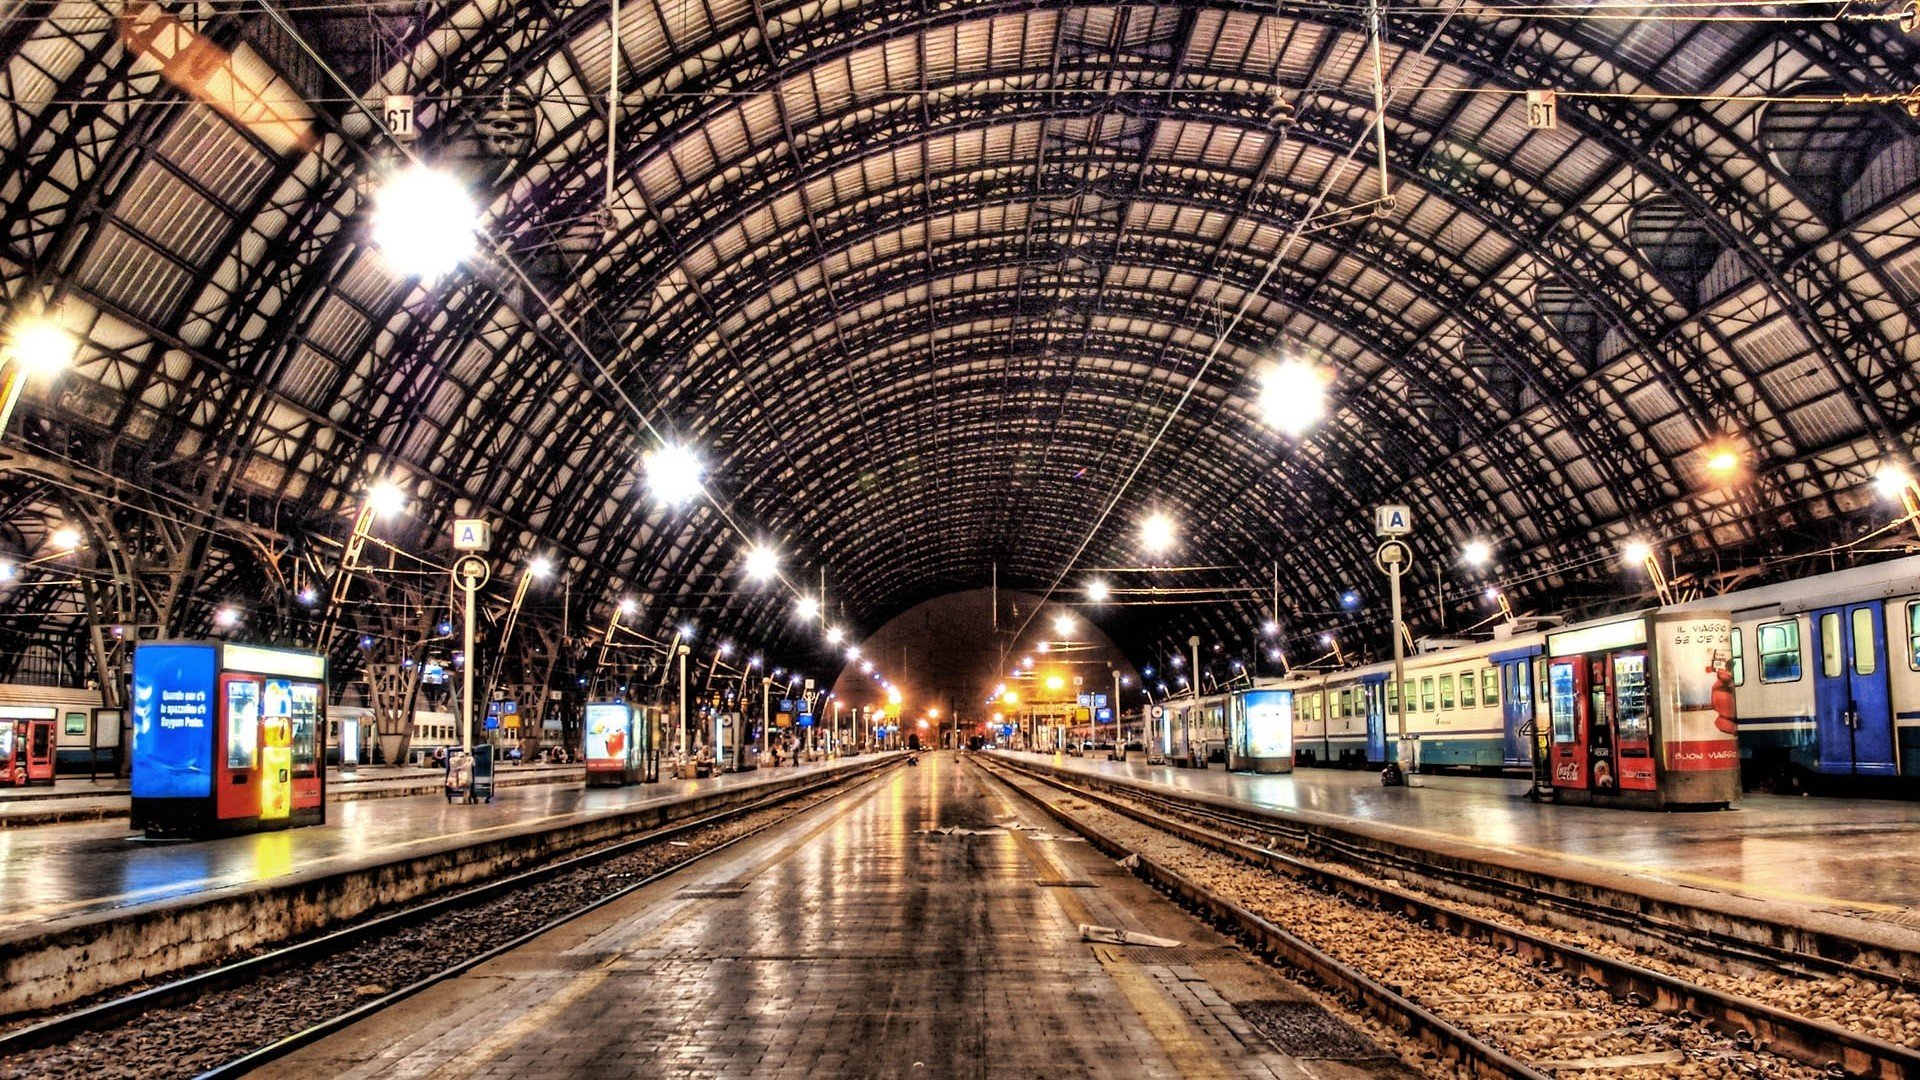 Interesting Wallpaper Train Station Backgrounds 1920x1080 Wallpaper Teahub Io Dreamy train station scenes in anime leave you with that tingling, wistful feeling of a journey about to be taken. interesting wallpaper train station